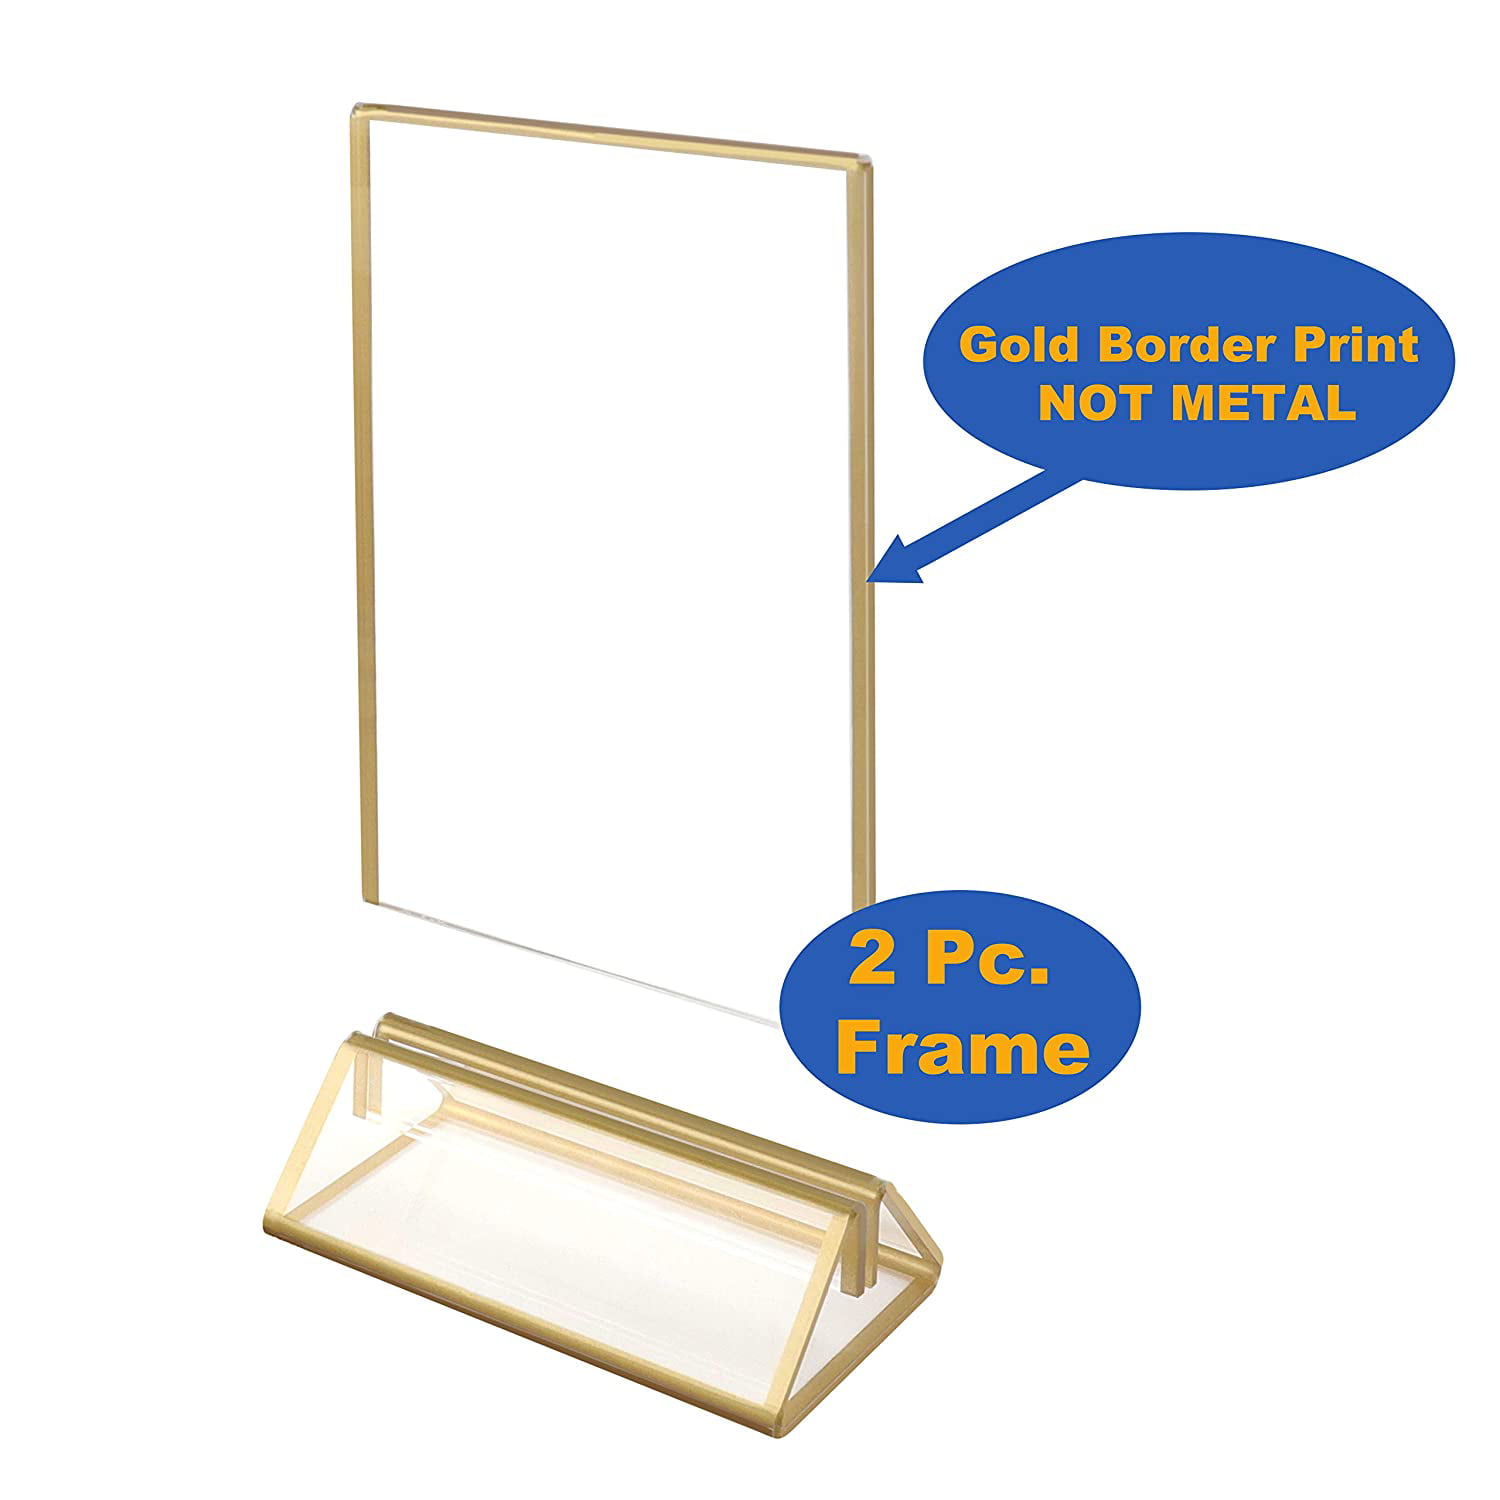 Photos and Art Display Restaurant Signs Double Sided Table Menu Holders Picture Frames for Wedding Table NIUBEE 6Pack 5 x 7 Clear Acrylic Sign Holder with Gold Borders and Vertical Stand 